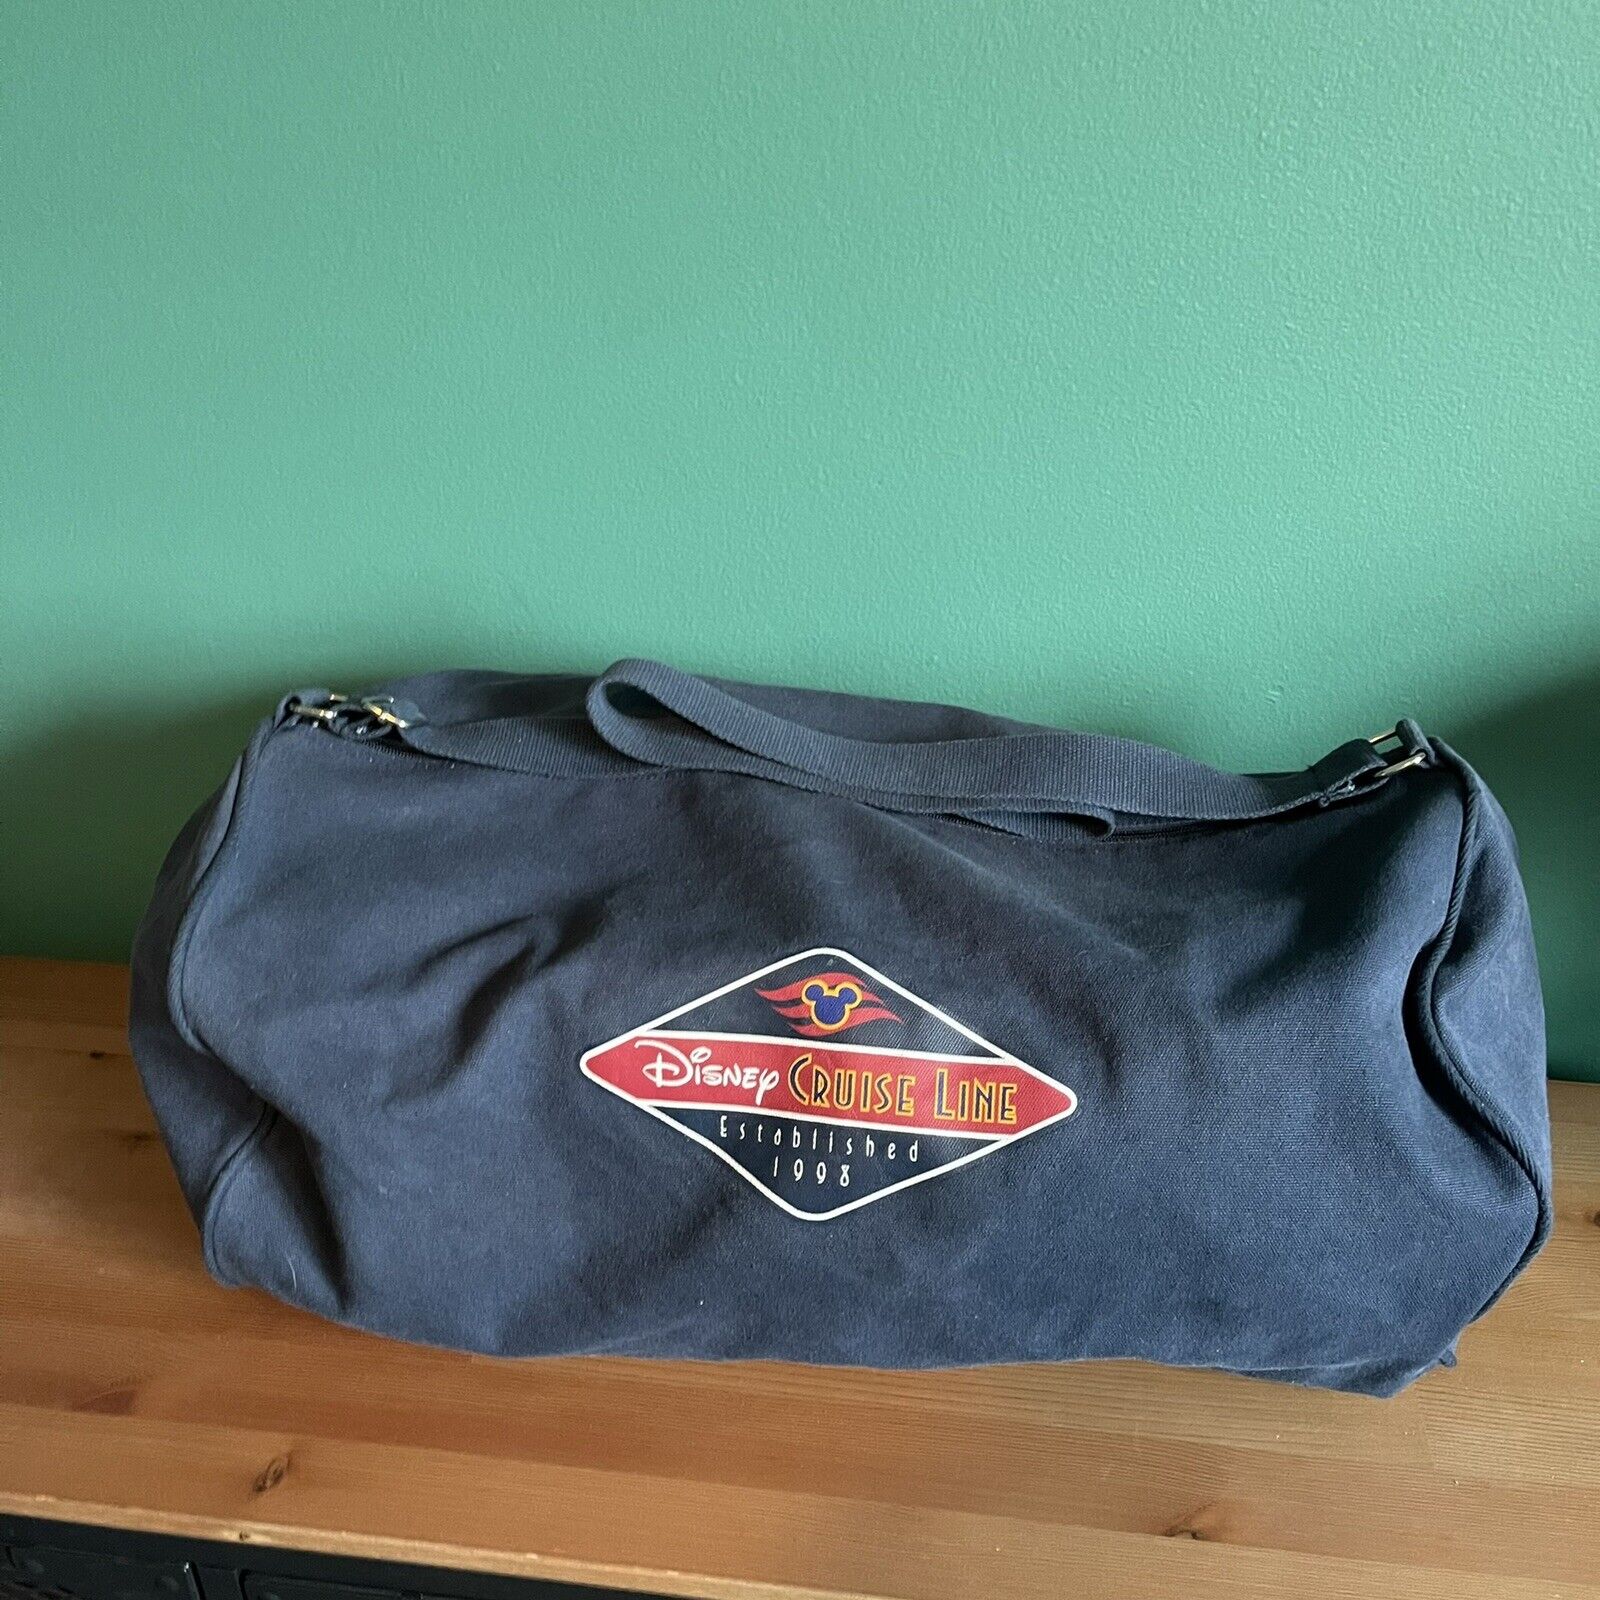 RARE Early 2000s Disney Cruise Line Blue Duffle Bag Carry All with Top Zipper